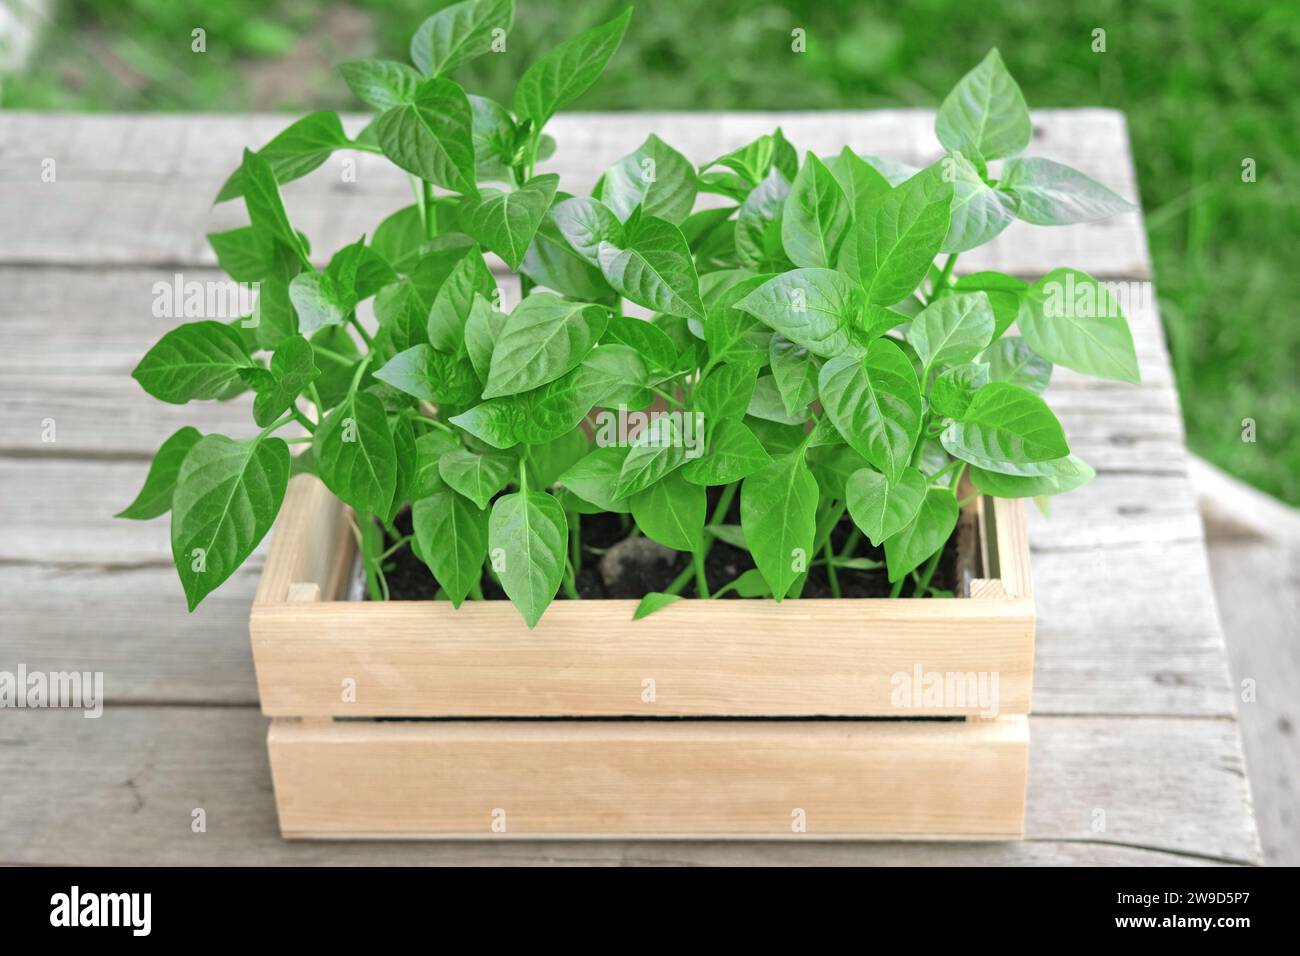 Seedling box against a rustic wooden wall. Wood crate with young pepper plants. Farming gardening concept. Plant nursery. Horticulture, cultivation, a Stock Photo